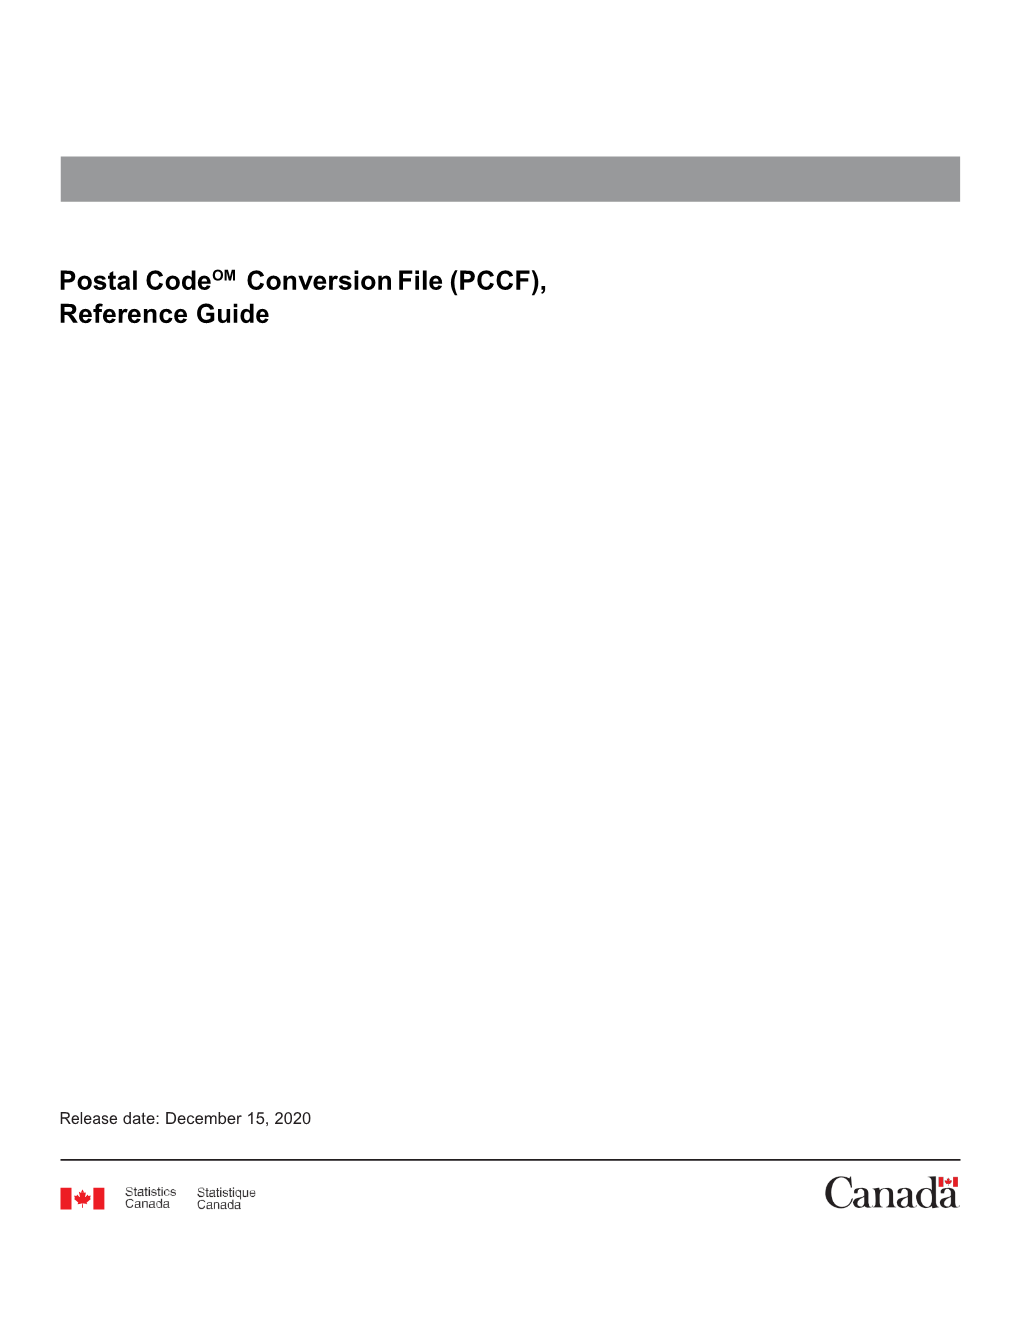 Postal Codeom Conversion File (PCCF), Reference Guide